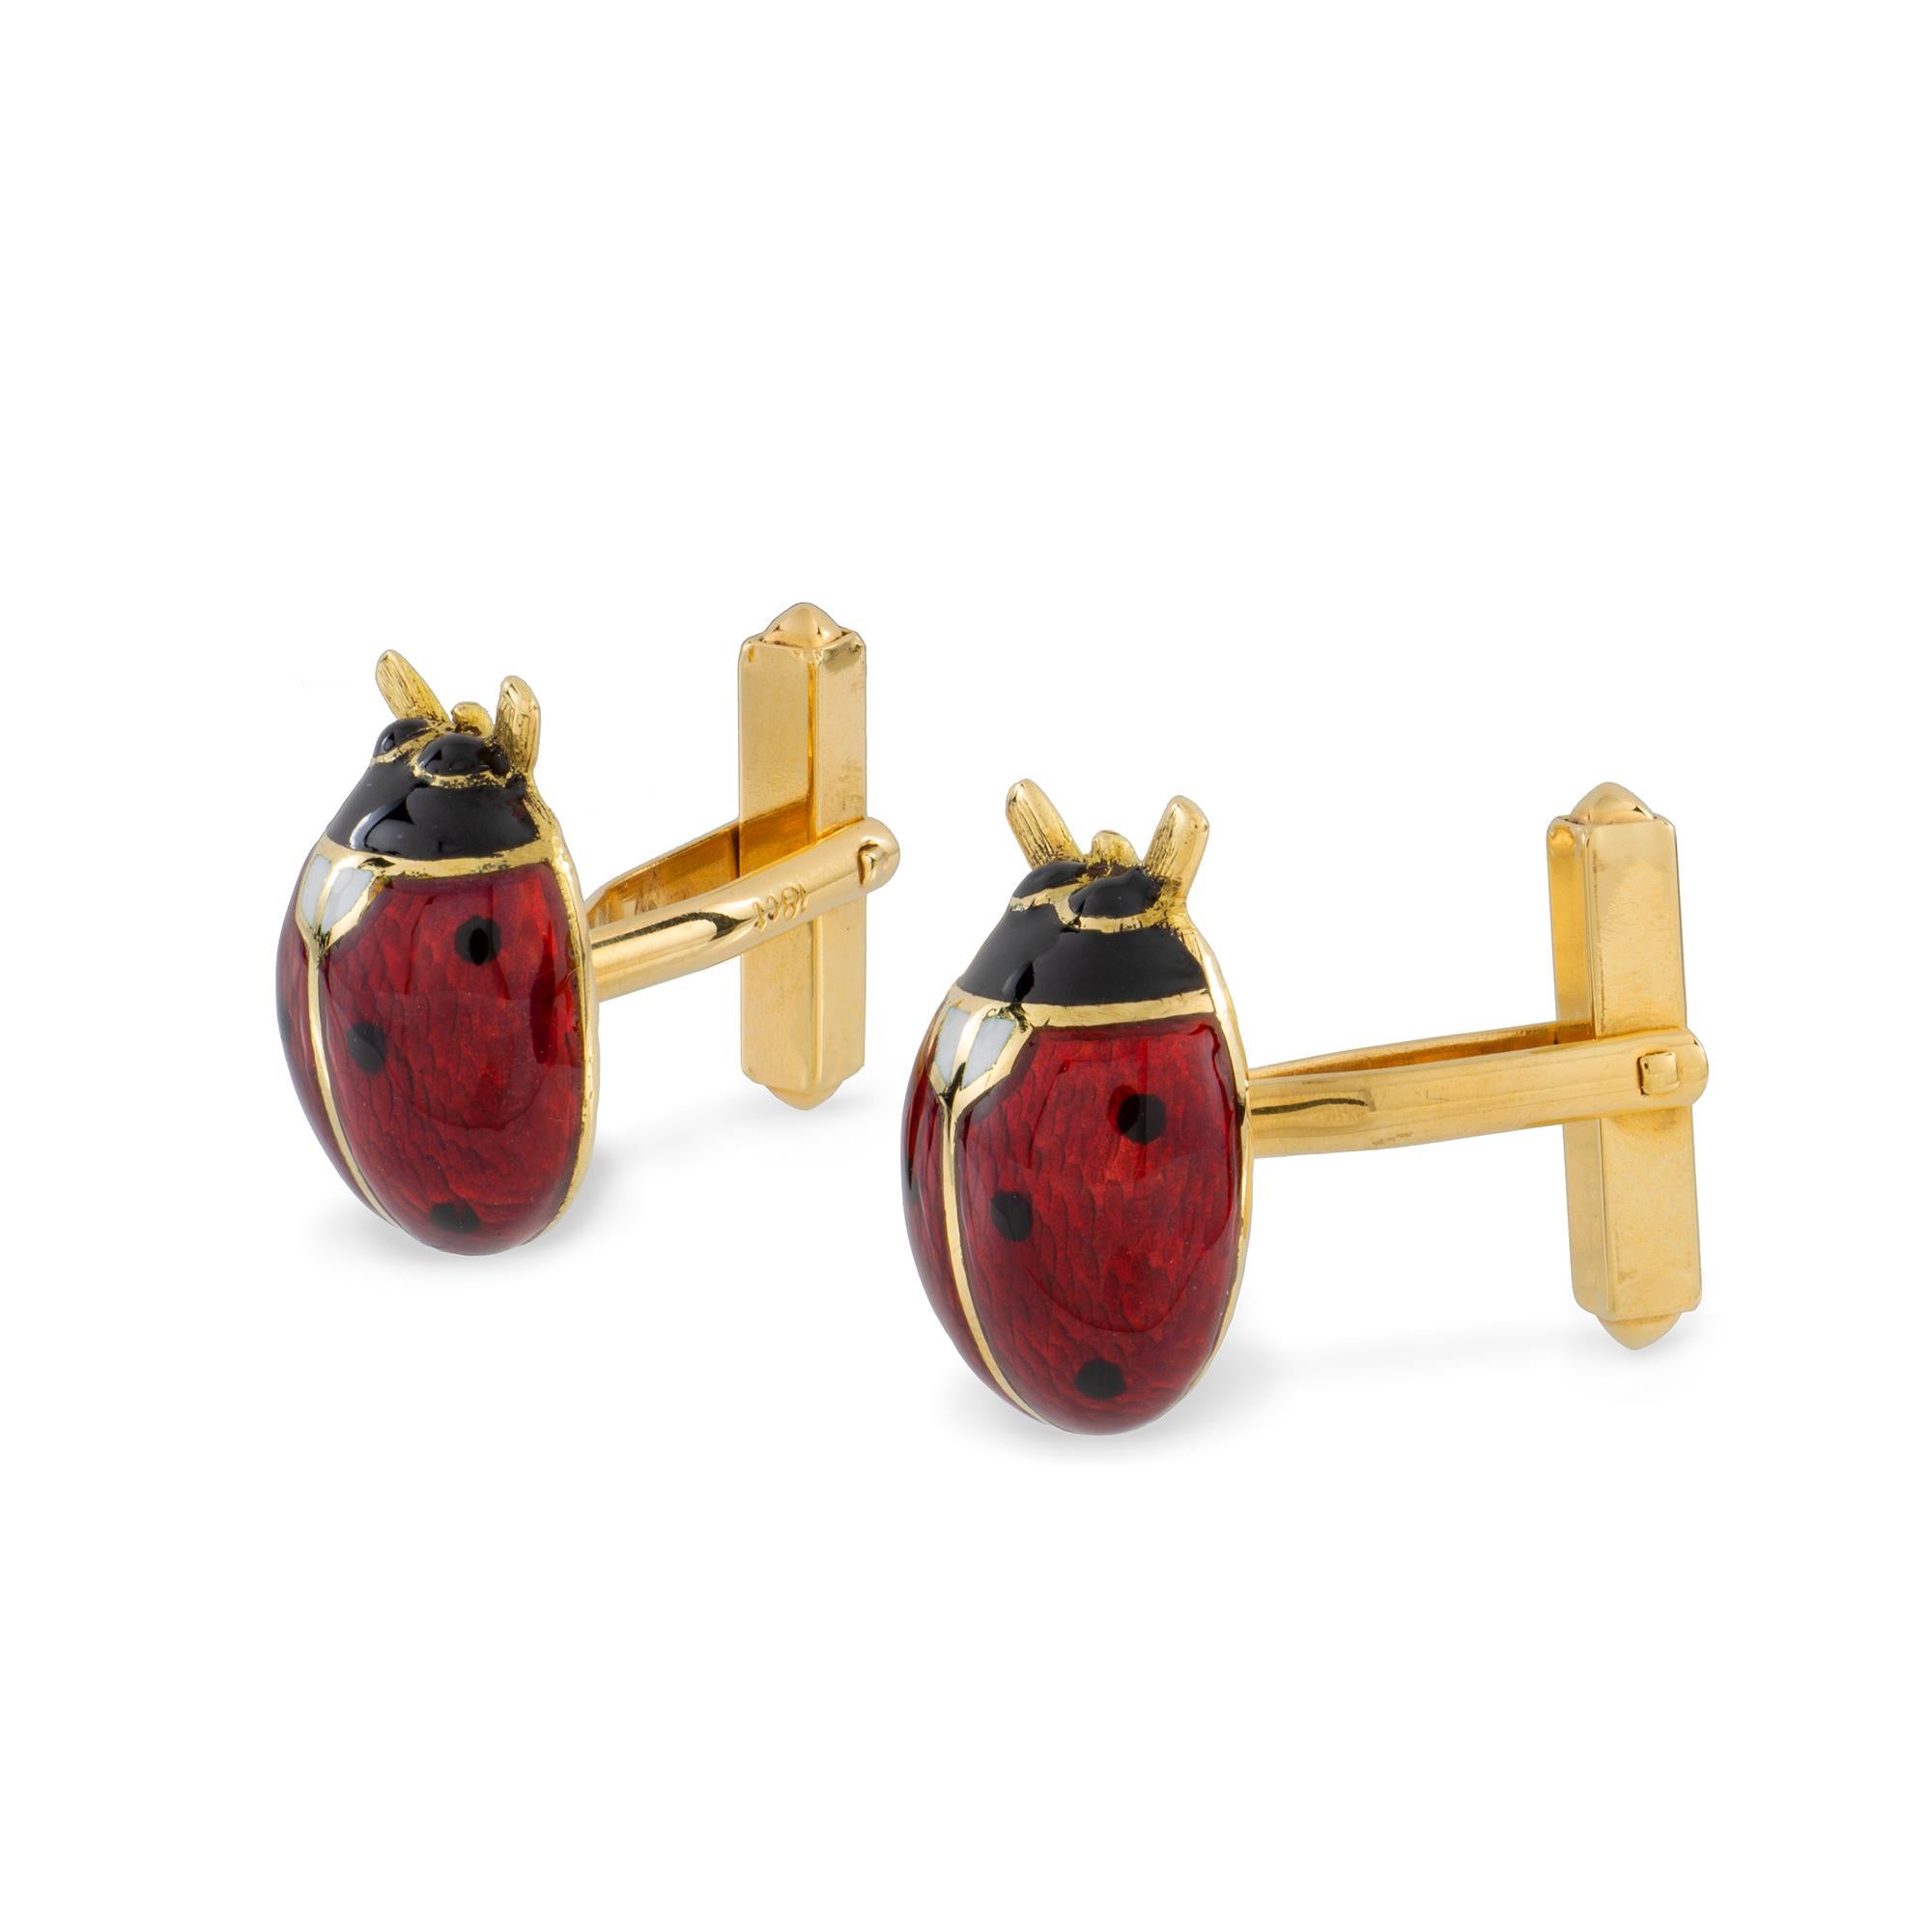 A pair of champleve enamel ladybird cufflinks, each with red, black and white enamelled body, all to a yellow gold mount with post fittings, hallmarked 18ct gold London, made by Bentley & Skinner, each ladybird measuring approximately 1.8 x 1.2cm,